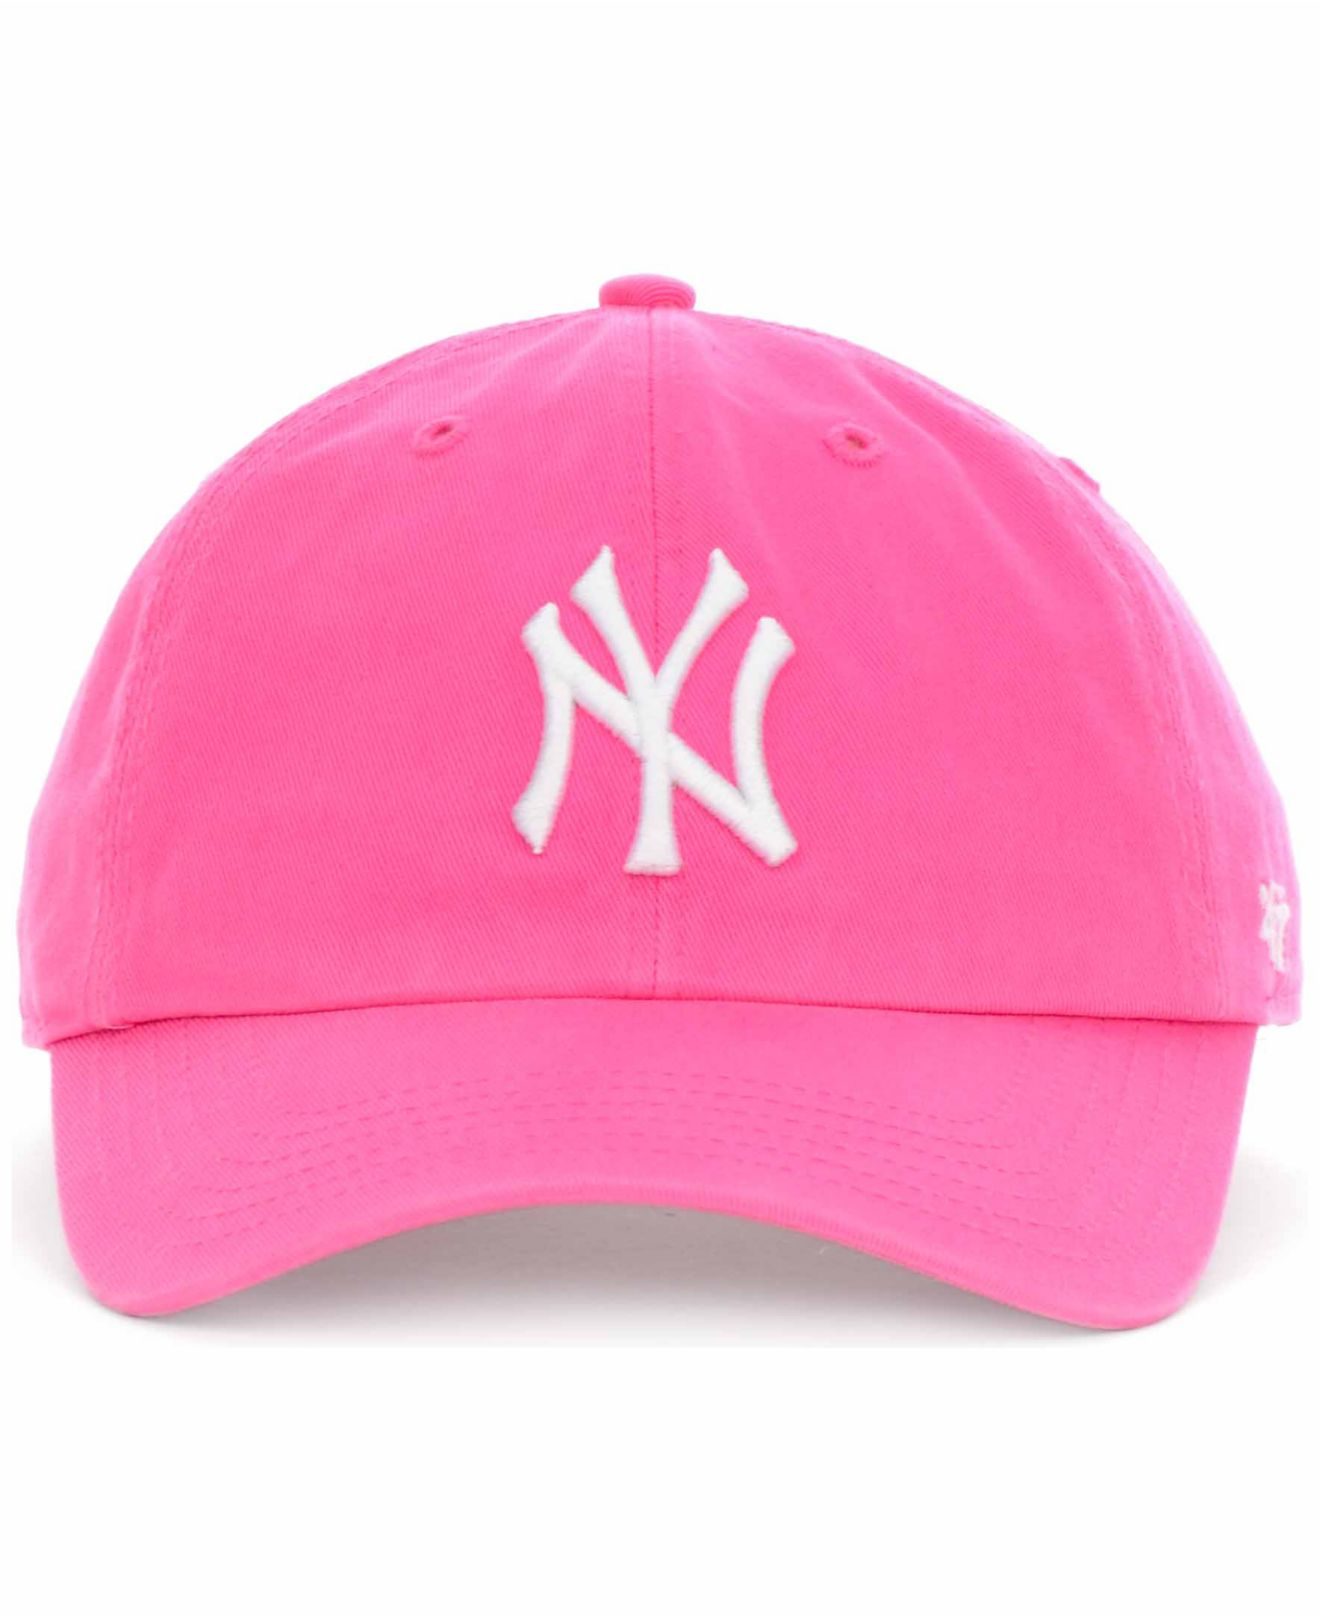 Lyst - 47 Brand New York Yankees Clean Up Hat in Pink